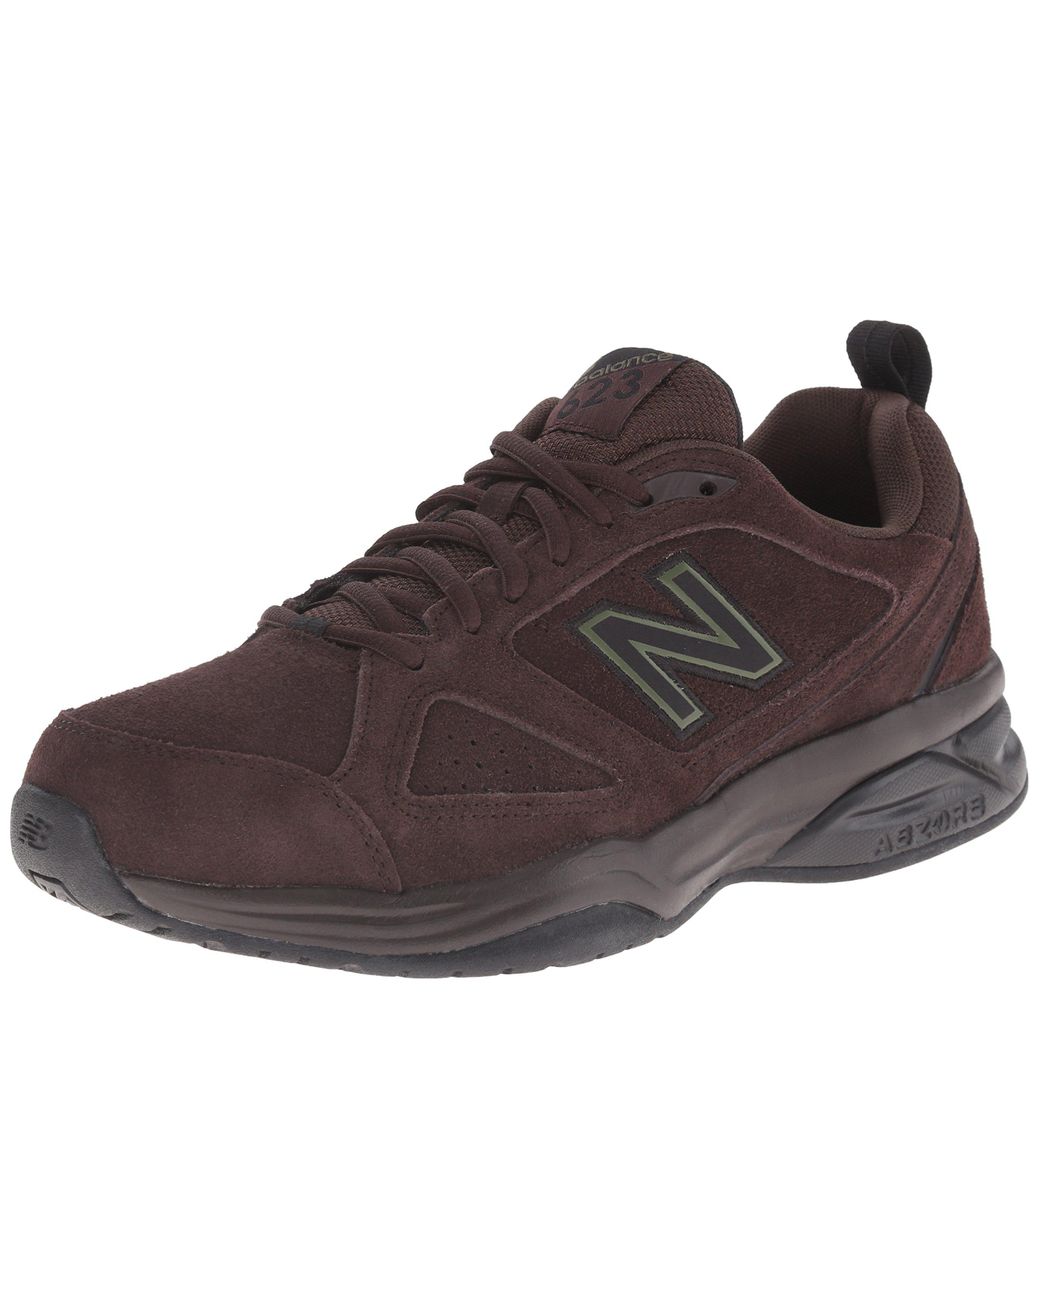 New Balance Leather Men ́s 623 V3 Training Shoes in Brown/Black (Brown ...